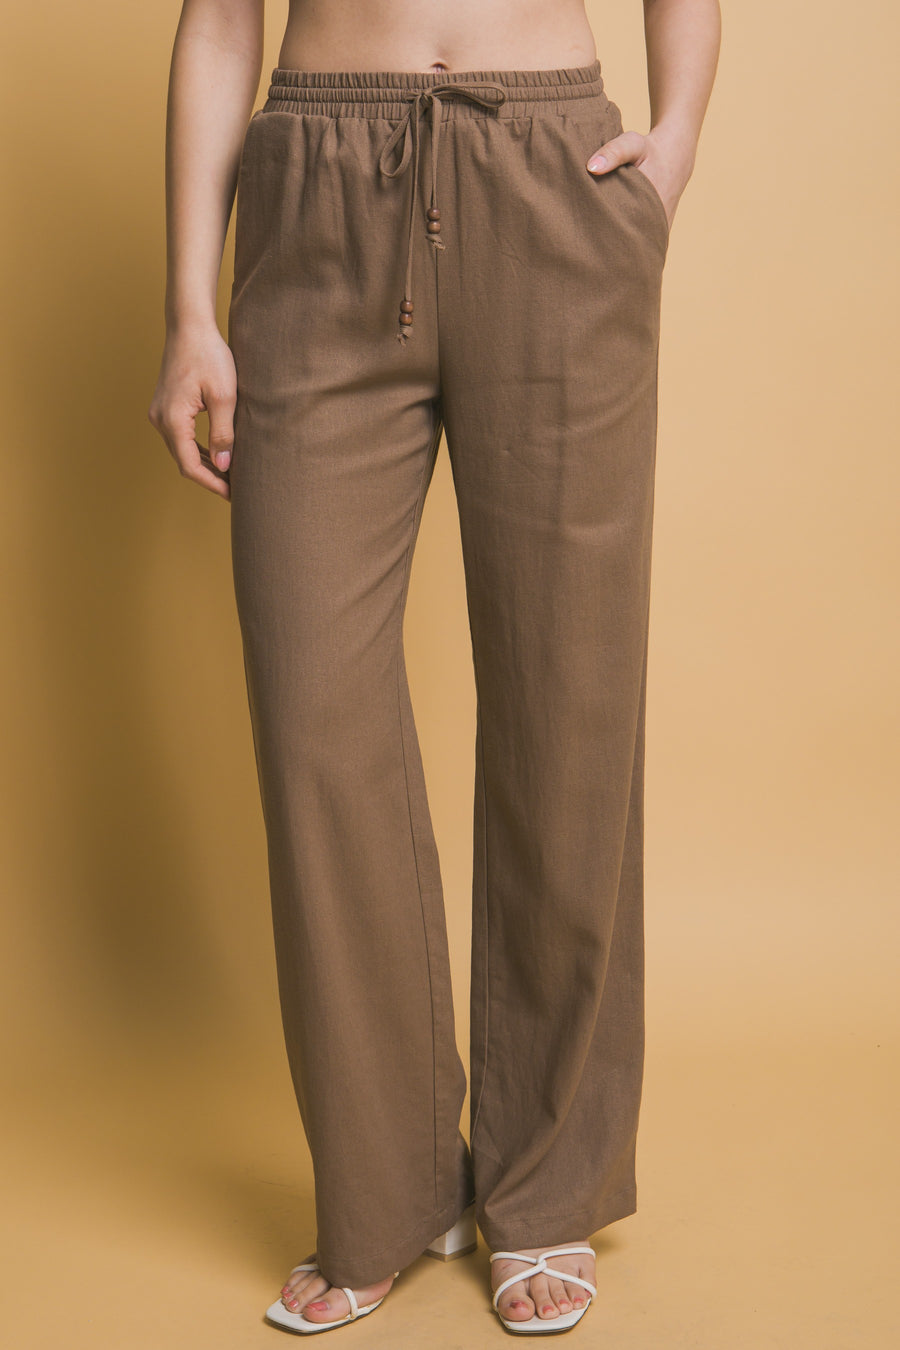 Featuring a straight leg linen pant with an elastic waist band and a tie front with added beaded detail in the color mocha 